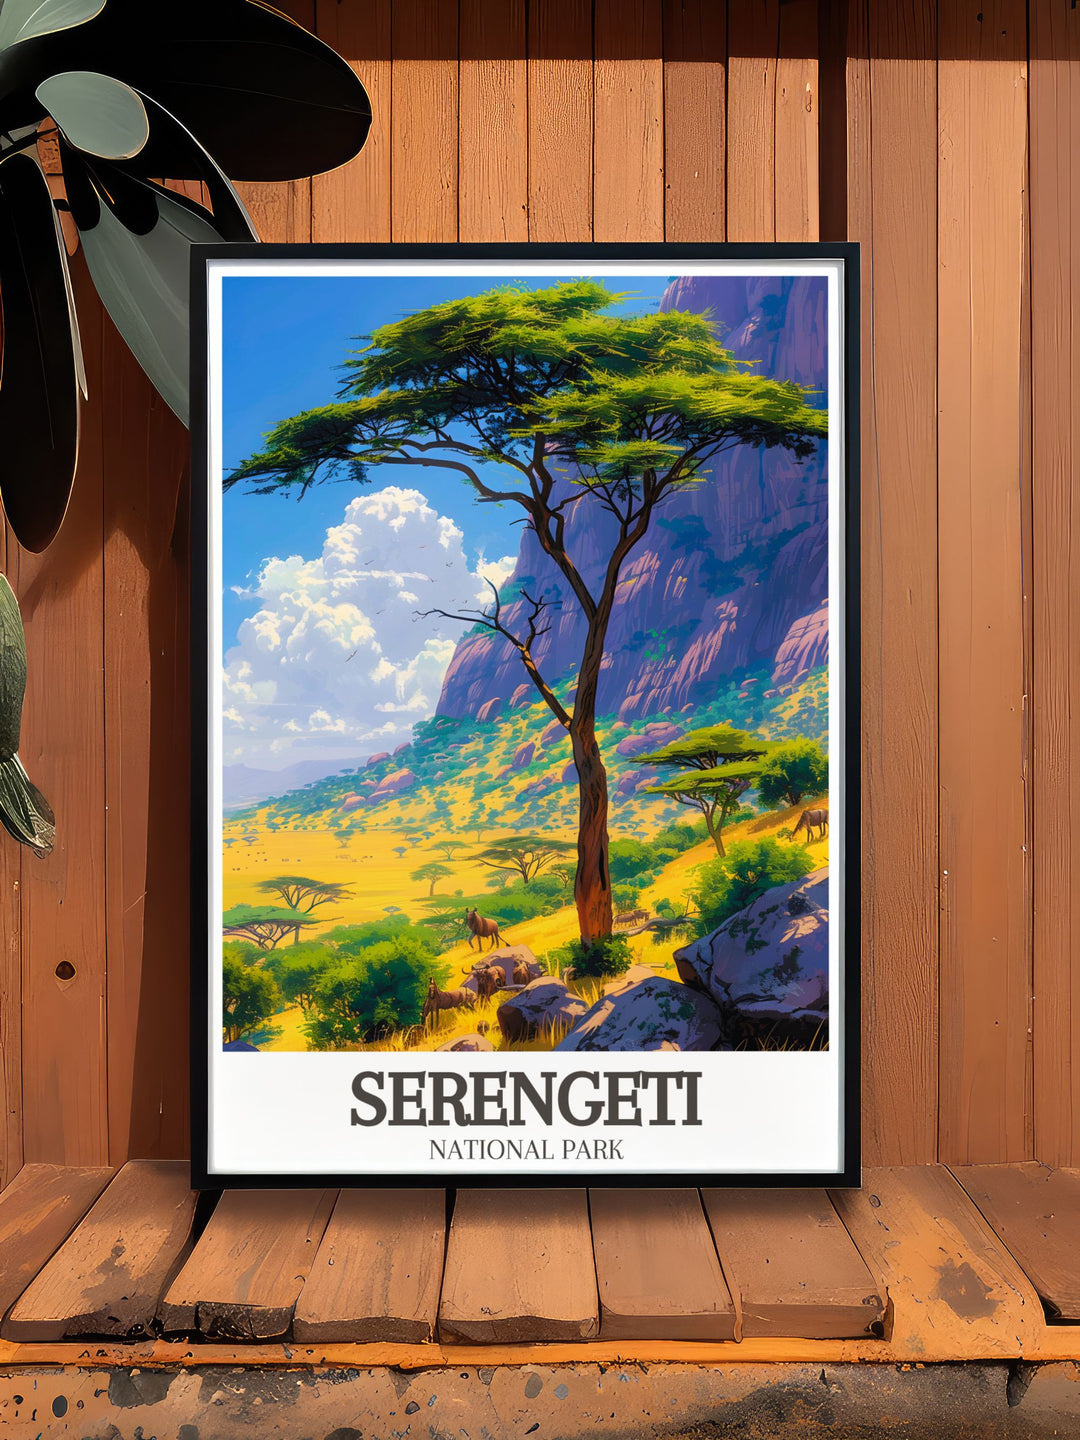 Stunning Acacia tree Wildlife savanna framed print featuring giraffes roaming the Serengeti perfect for adding a touch of African elegance to your home decor